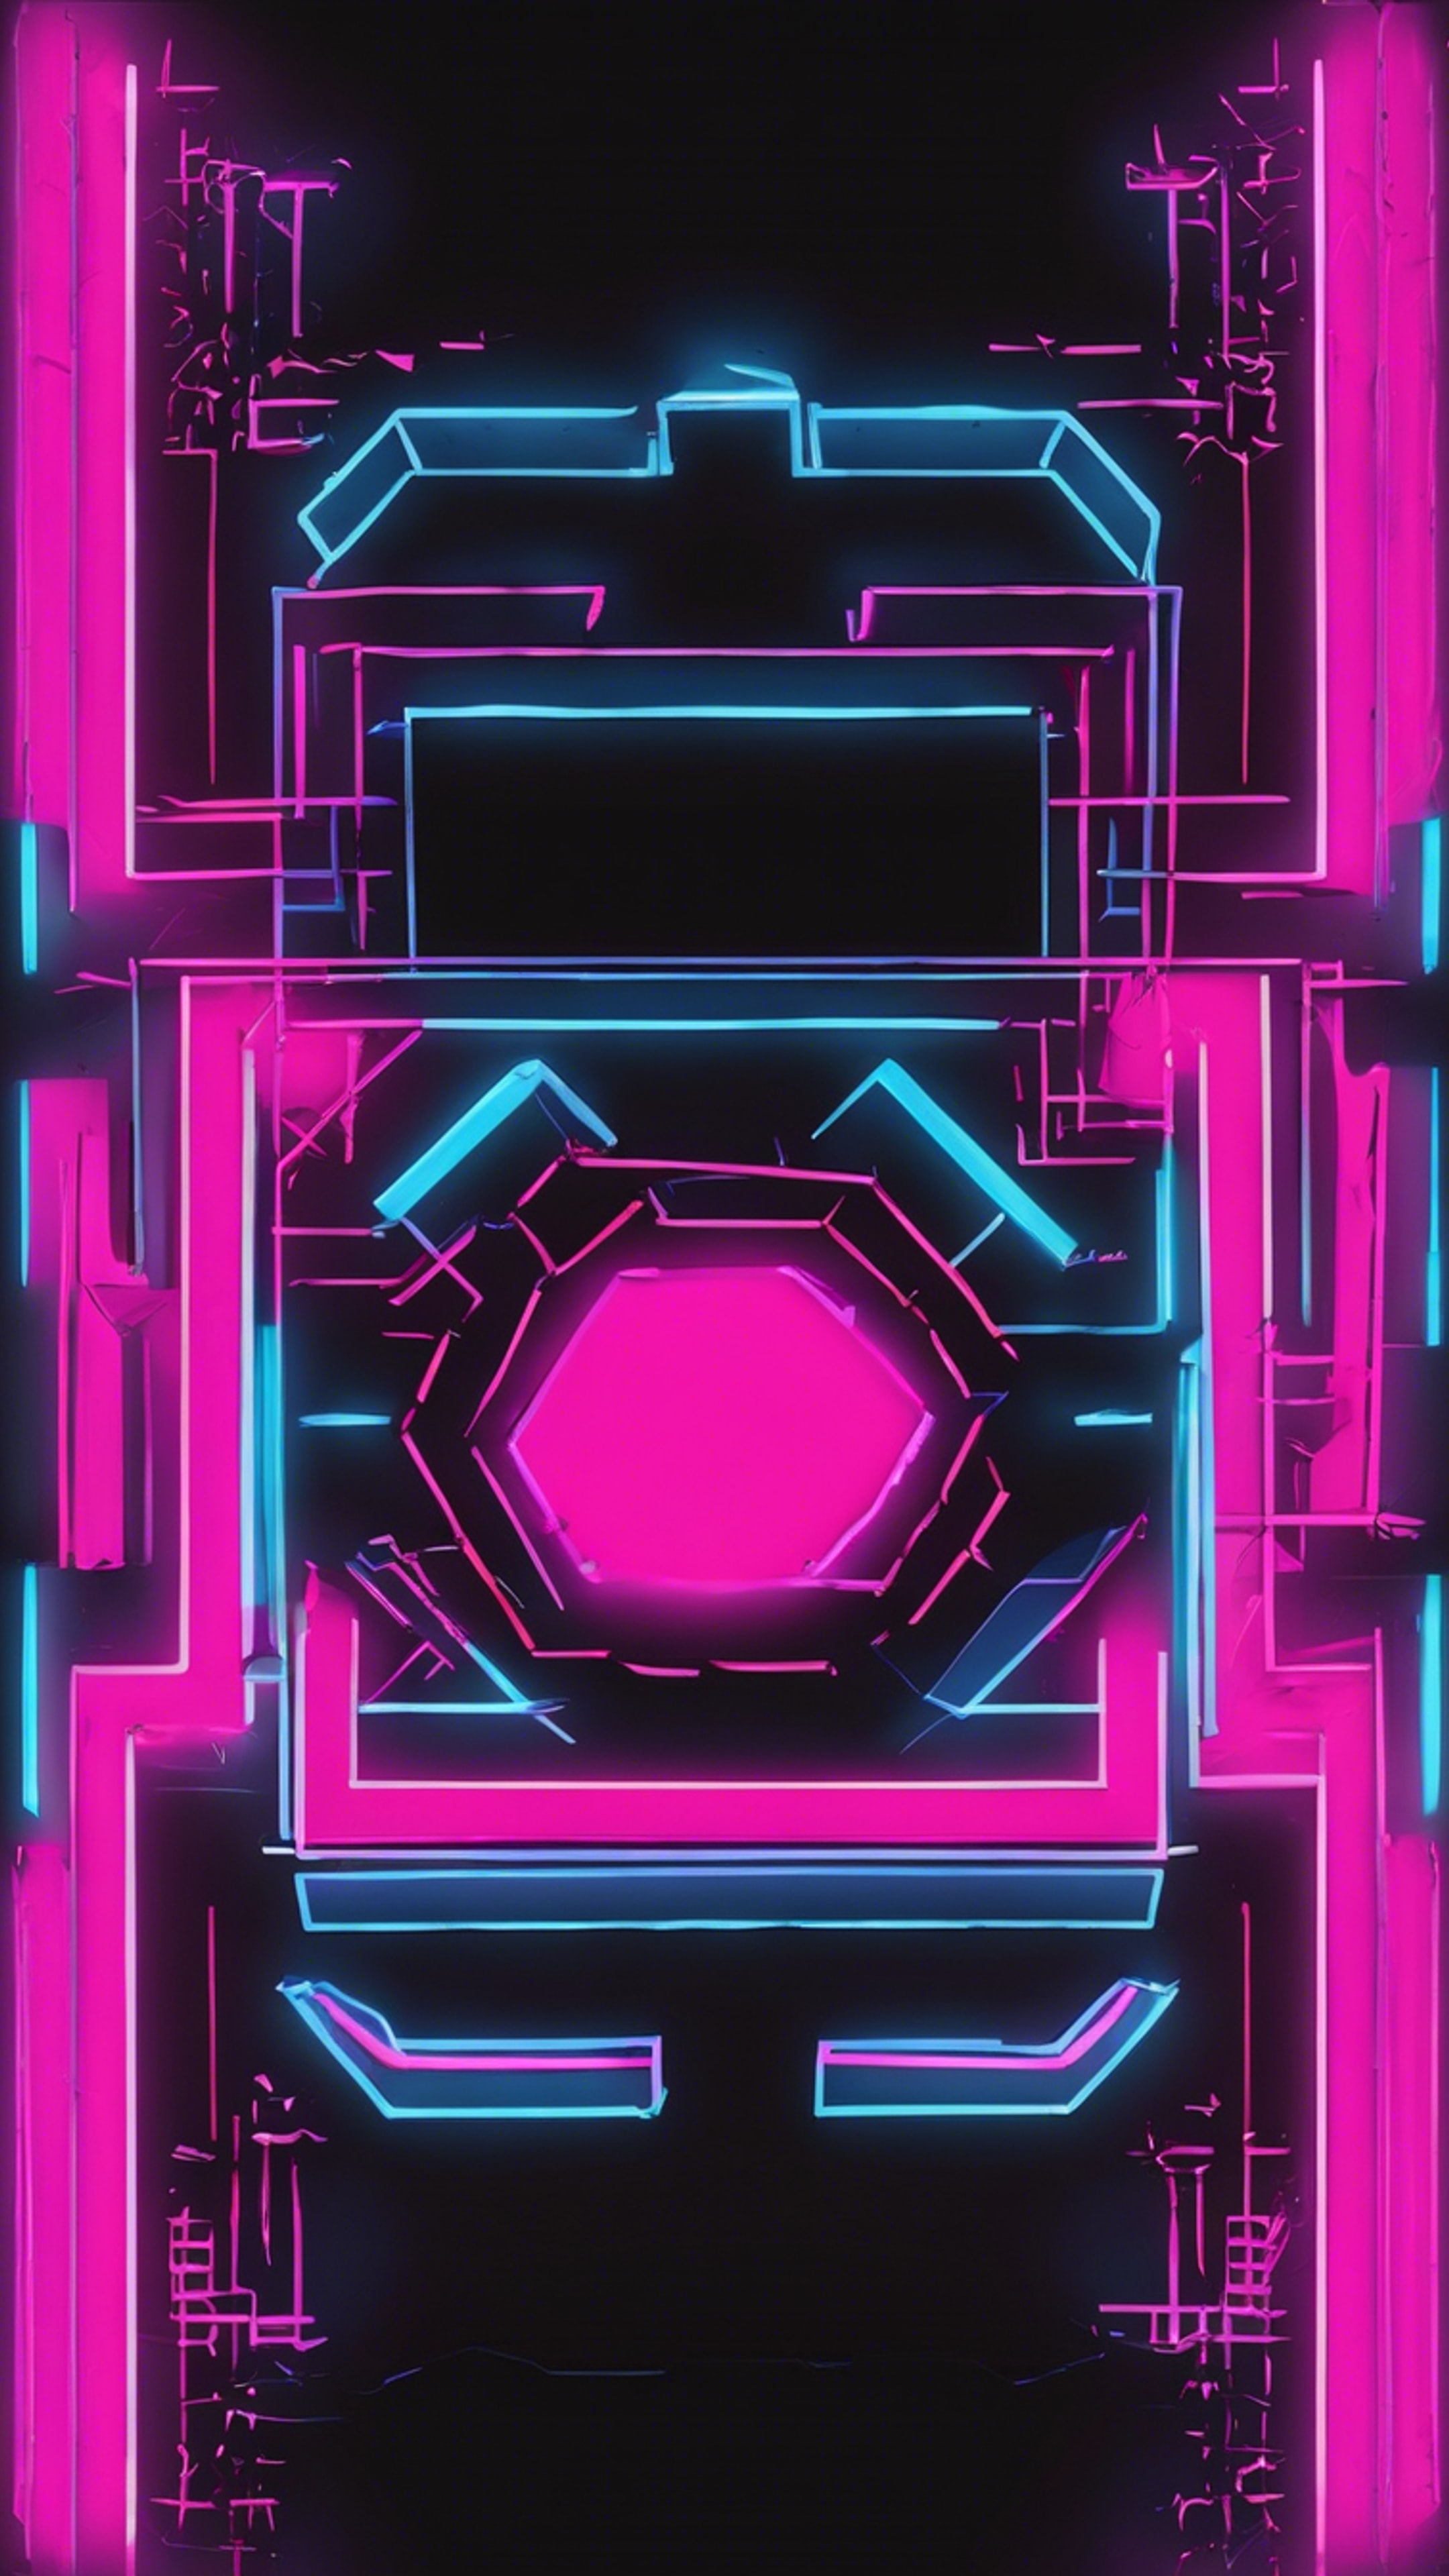 Bright neon pink and blue geometric shapes against a black background, reminiscent of 80s arcade games. Behang[dd42a0f55e3e425295c8]